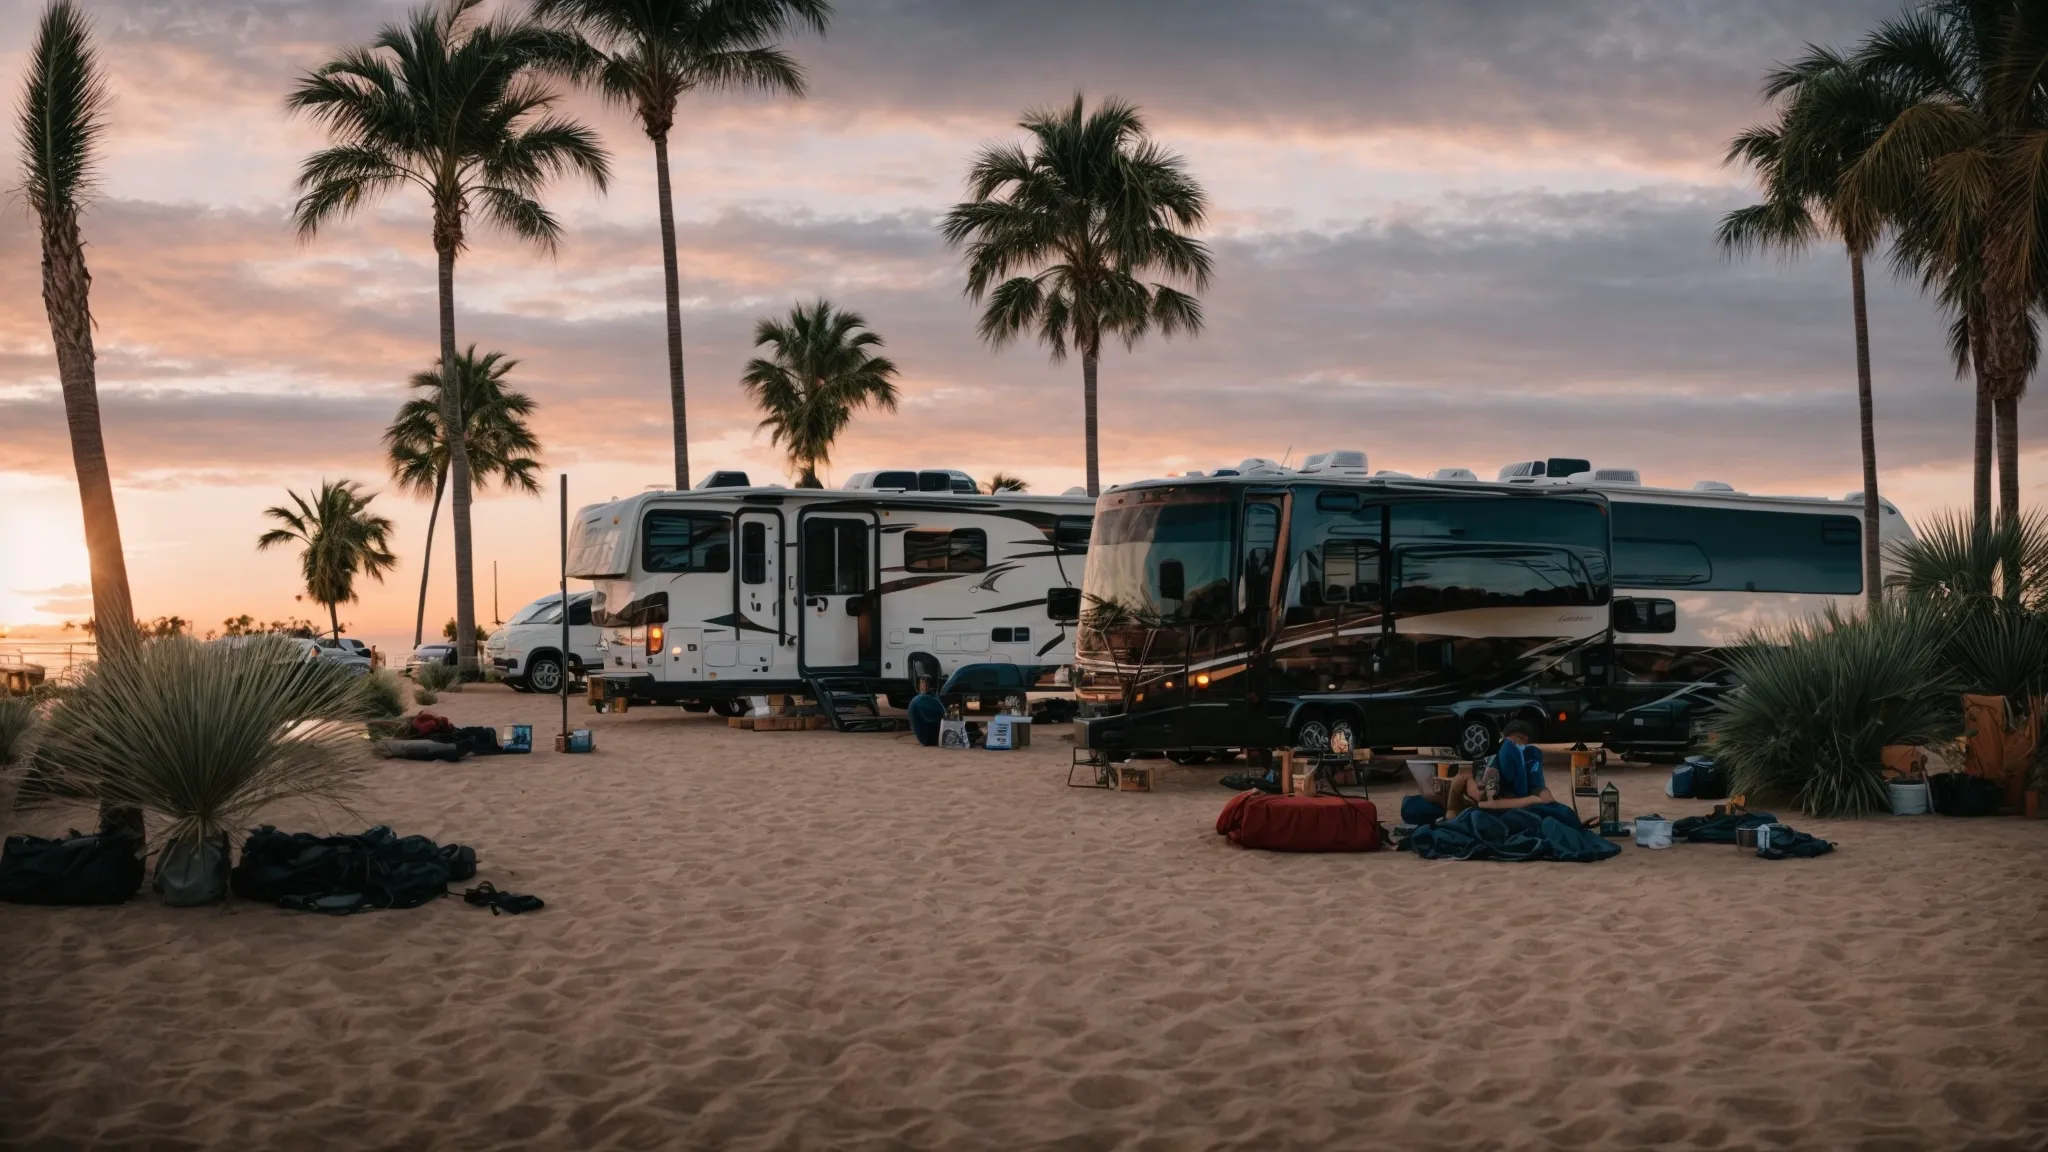 palm trees sway gently over an expanse of cozy, nestled rvs under a brilliant californian sunset at the san diego rv resort.